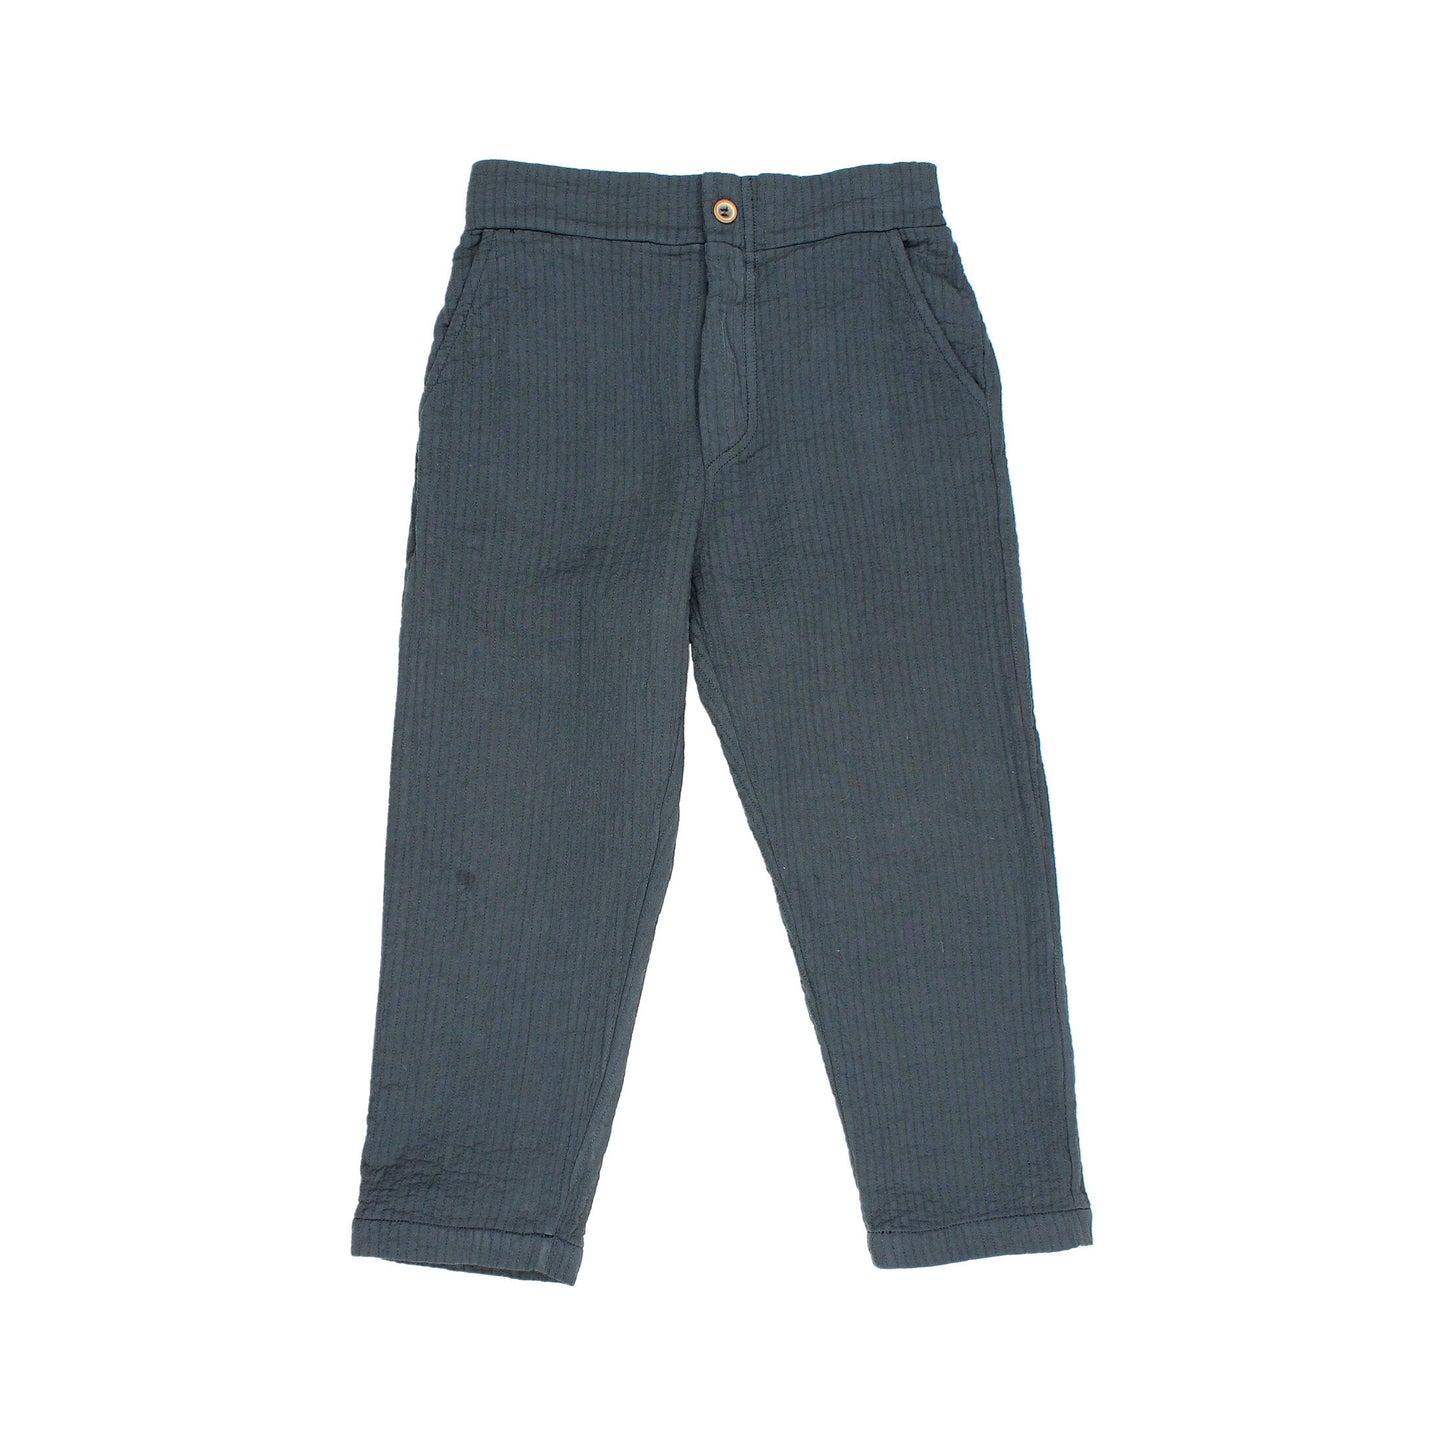 Textured Pants in Midnight - Toddler